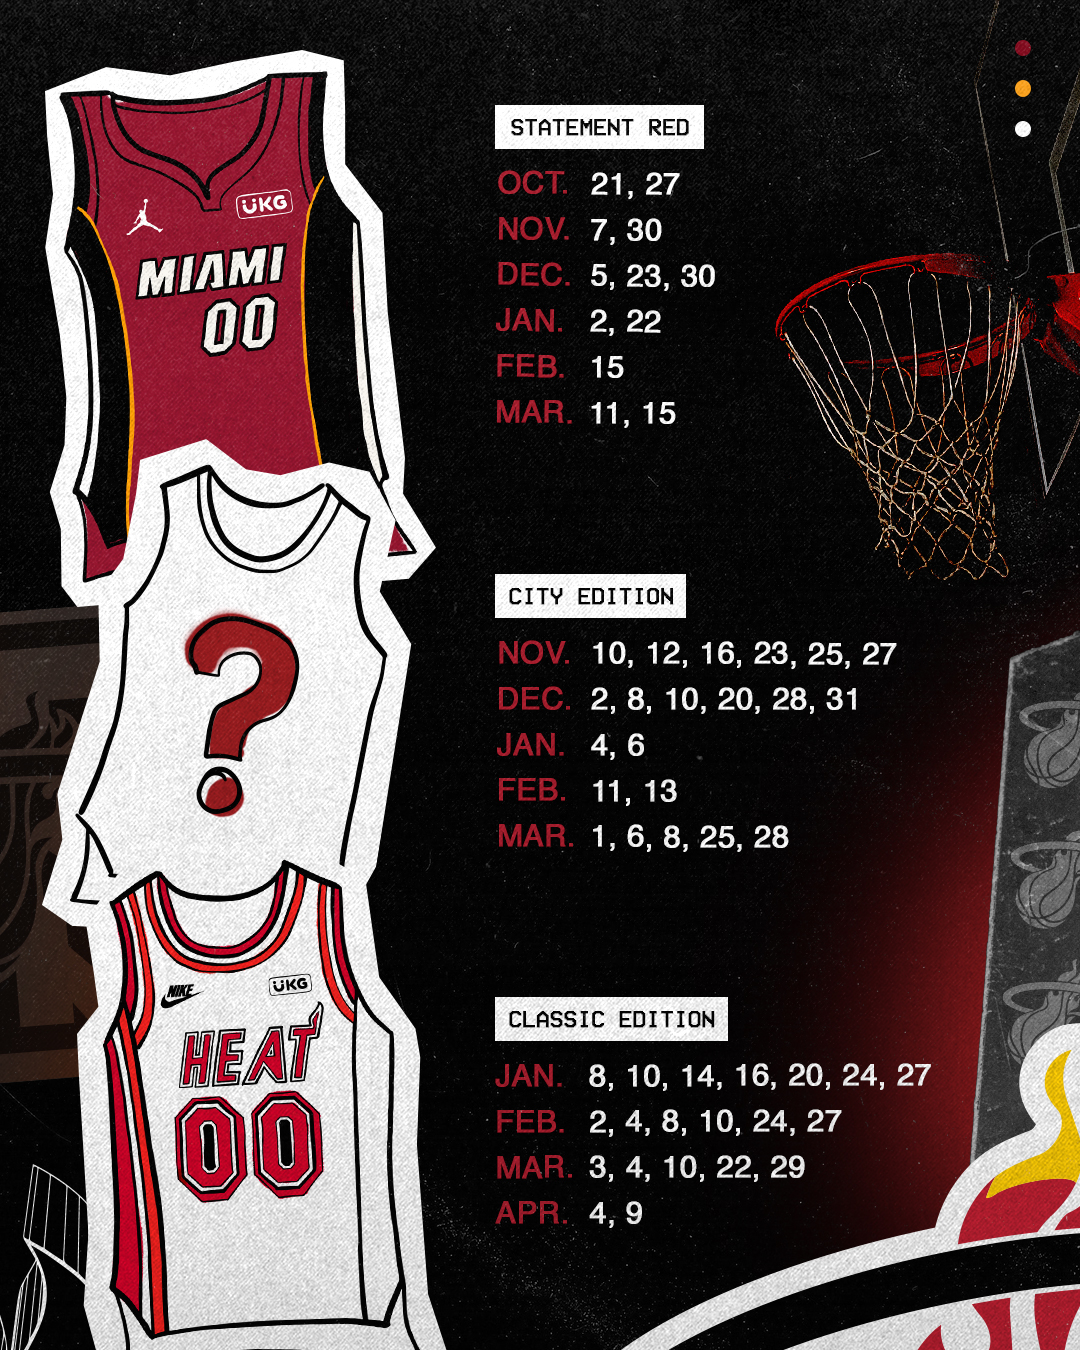 Miami Heat - HEAT Nation we're spending the next 4 days listening to your  opinions on the history of our jerseys Starting with our Hardwood Classics  let us know which is your